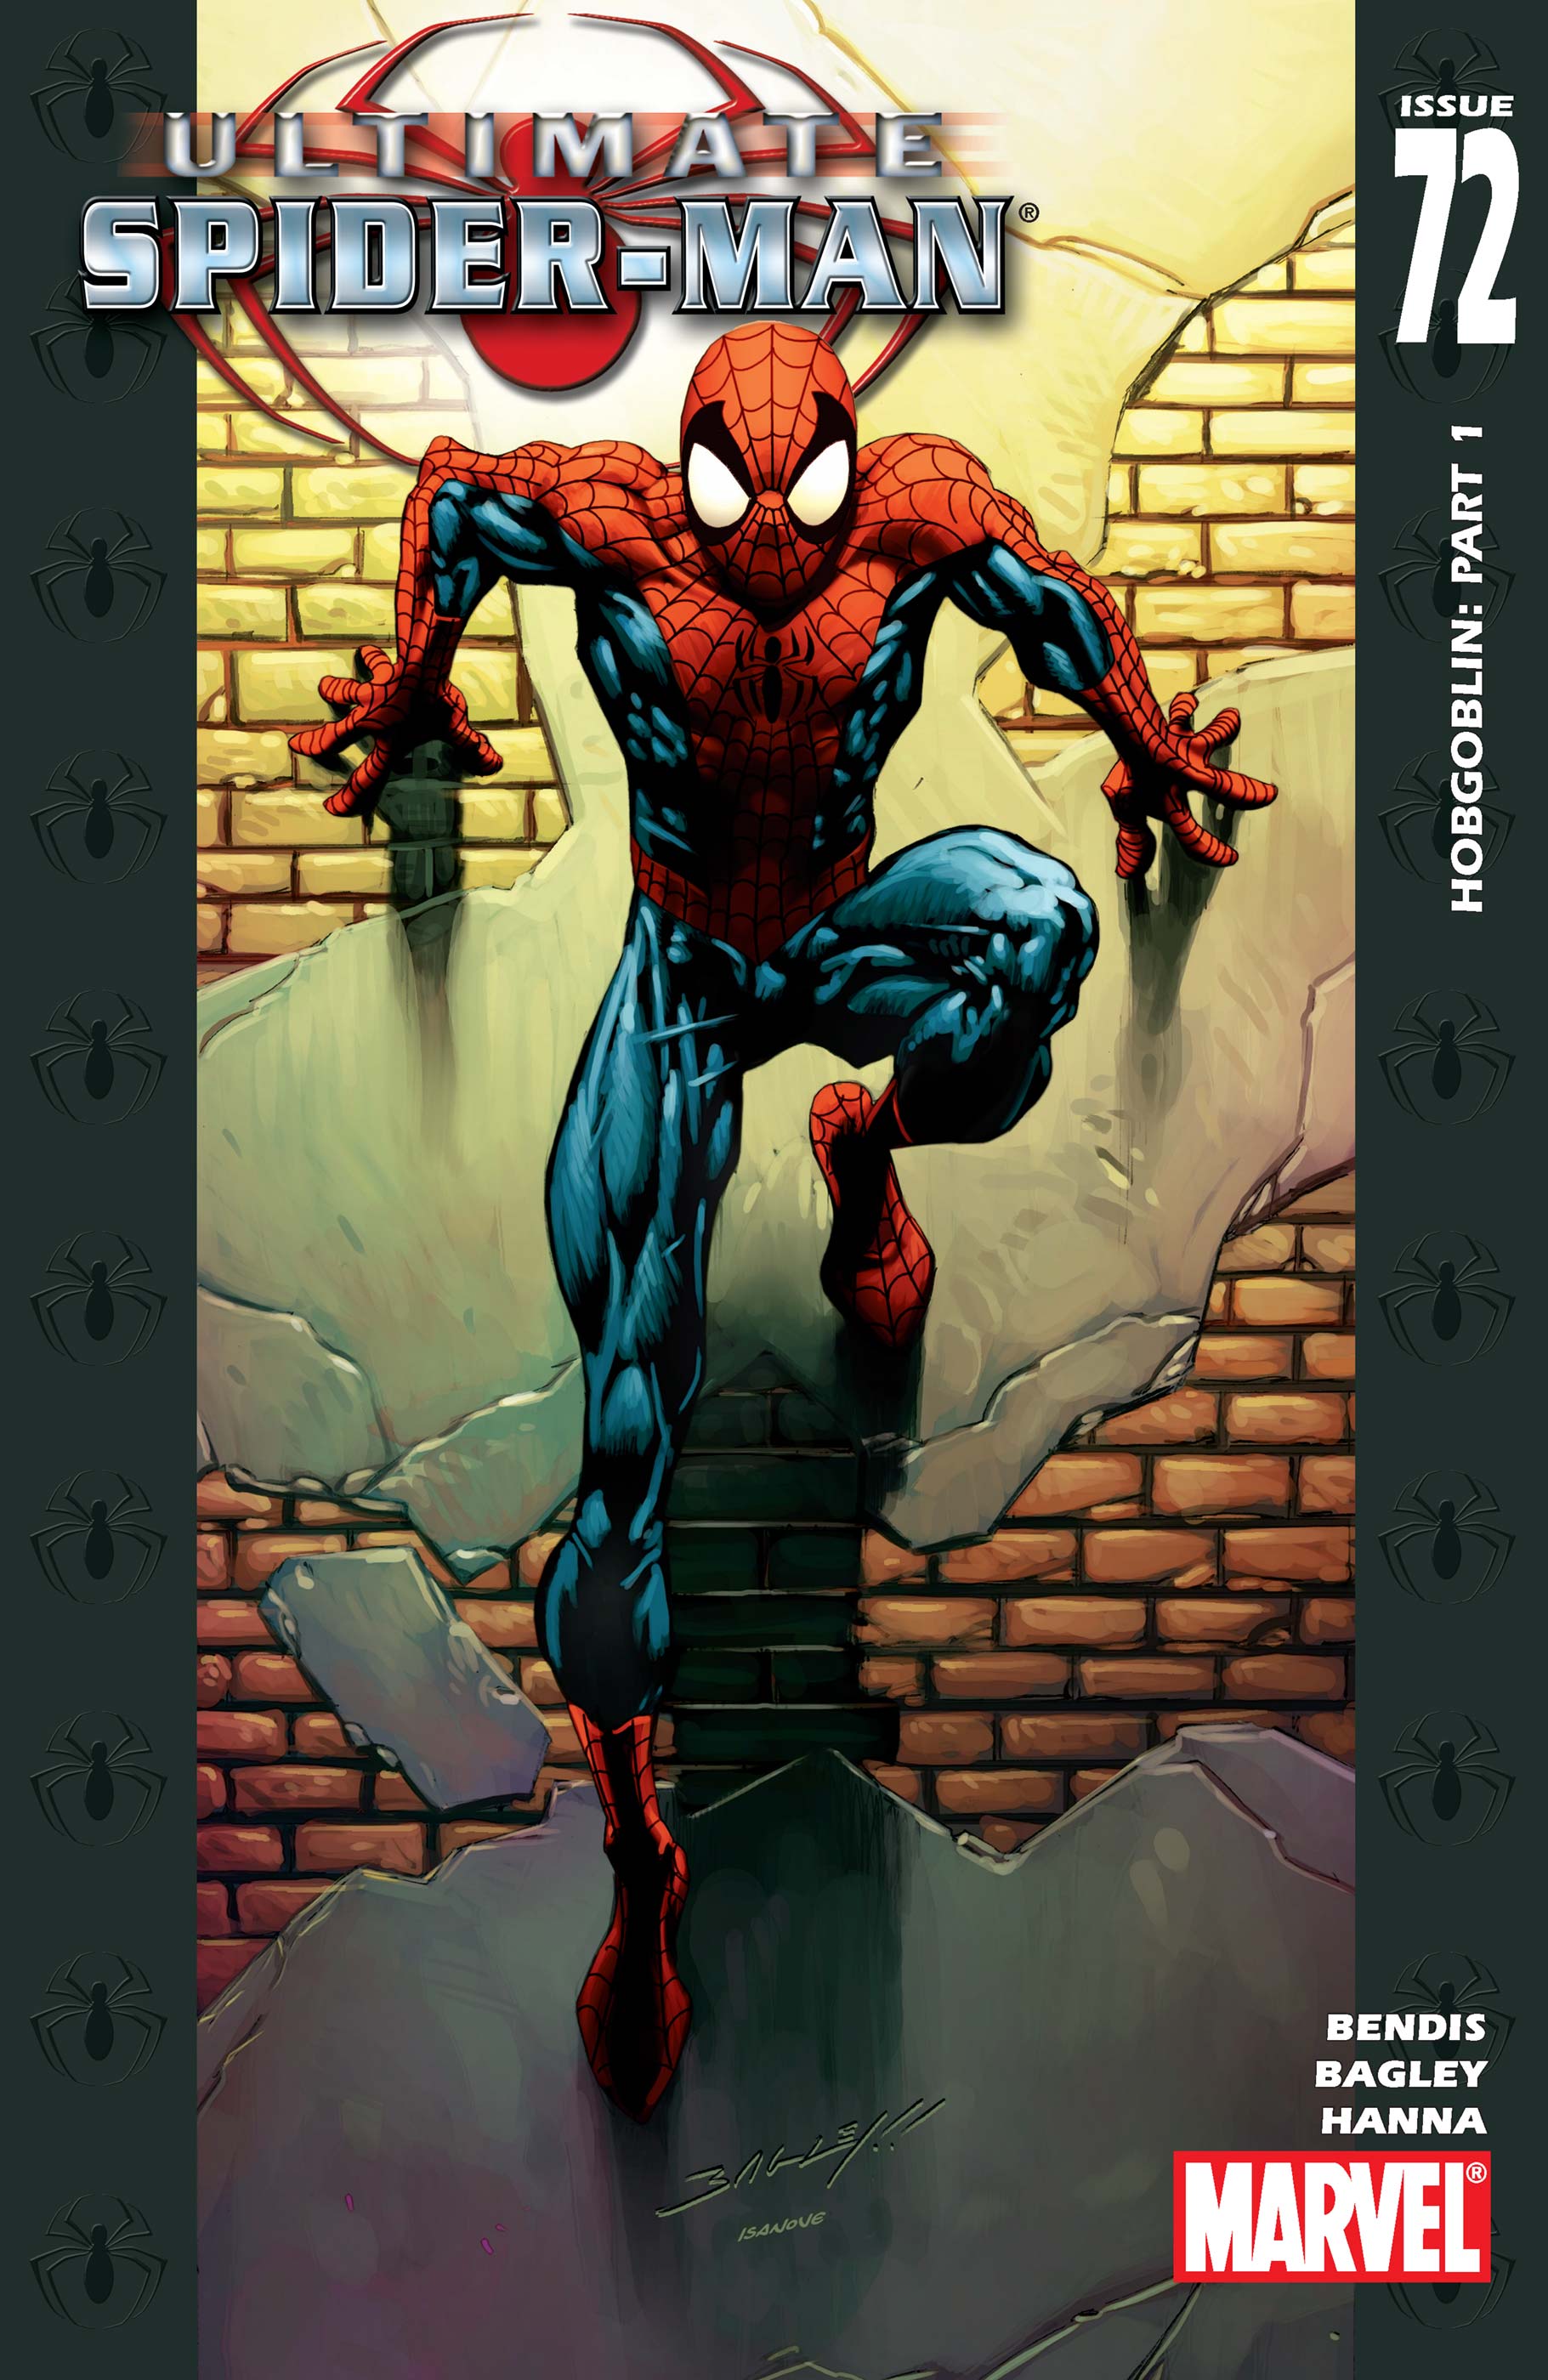 Ultimate Spider-Man (2000) #72 | Comic Issues | Marvel